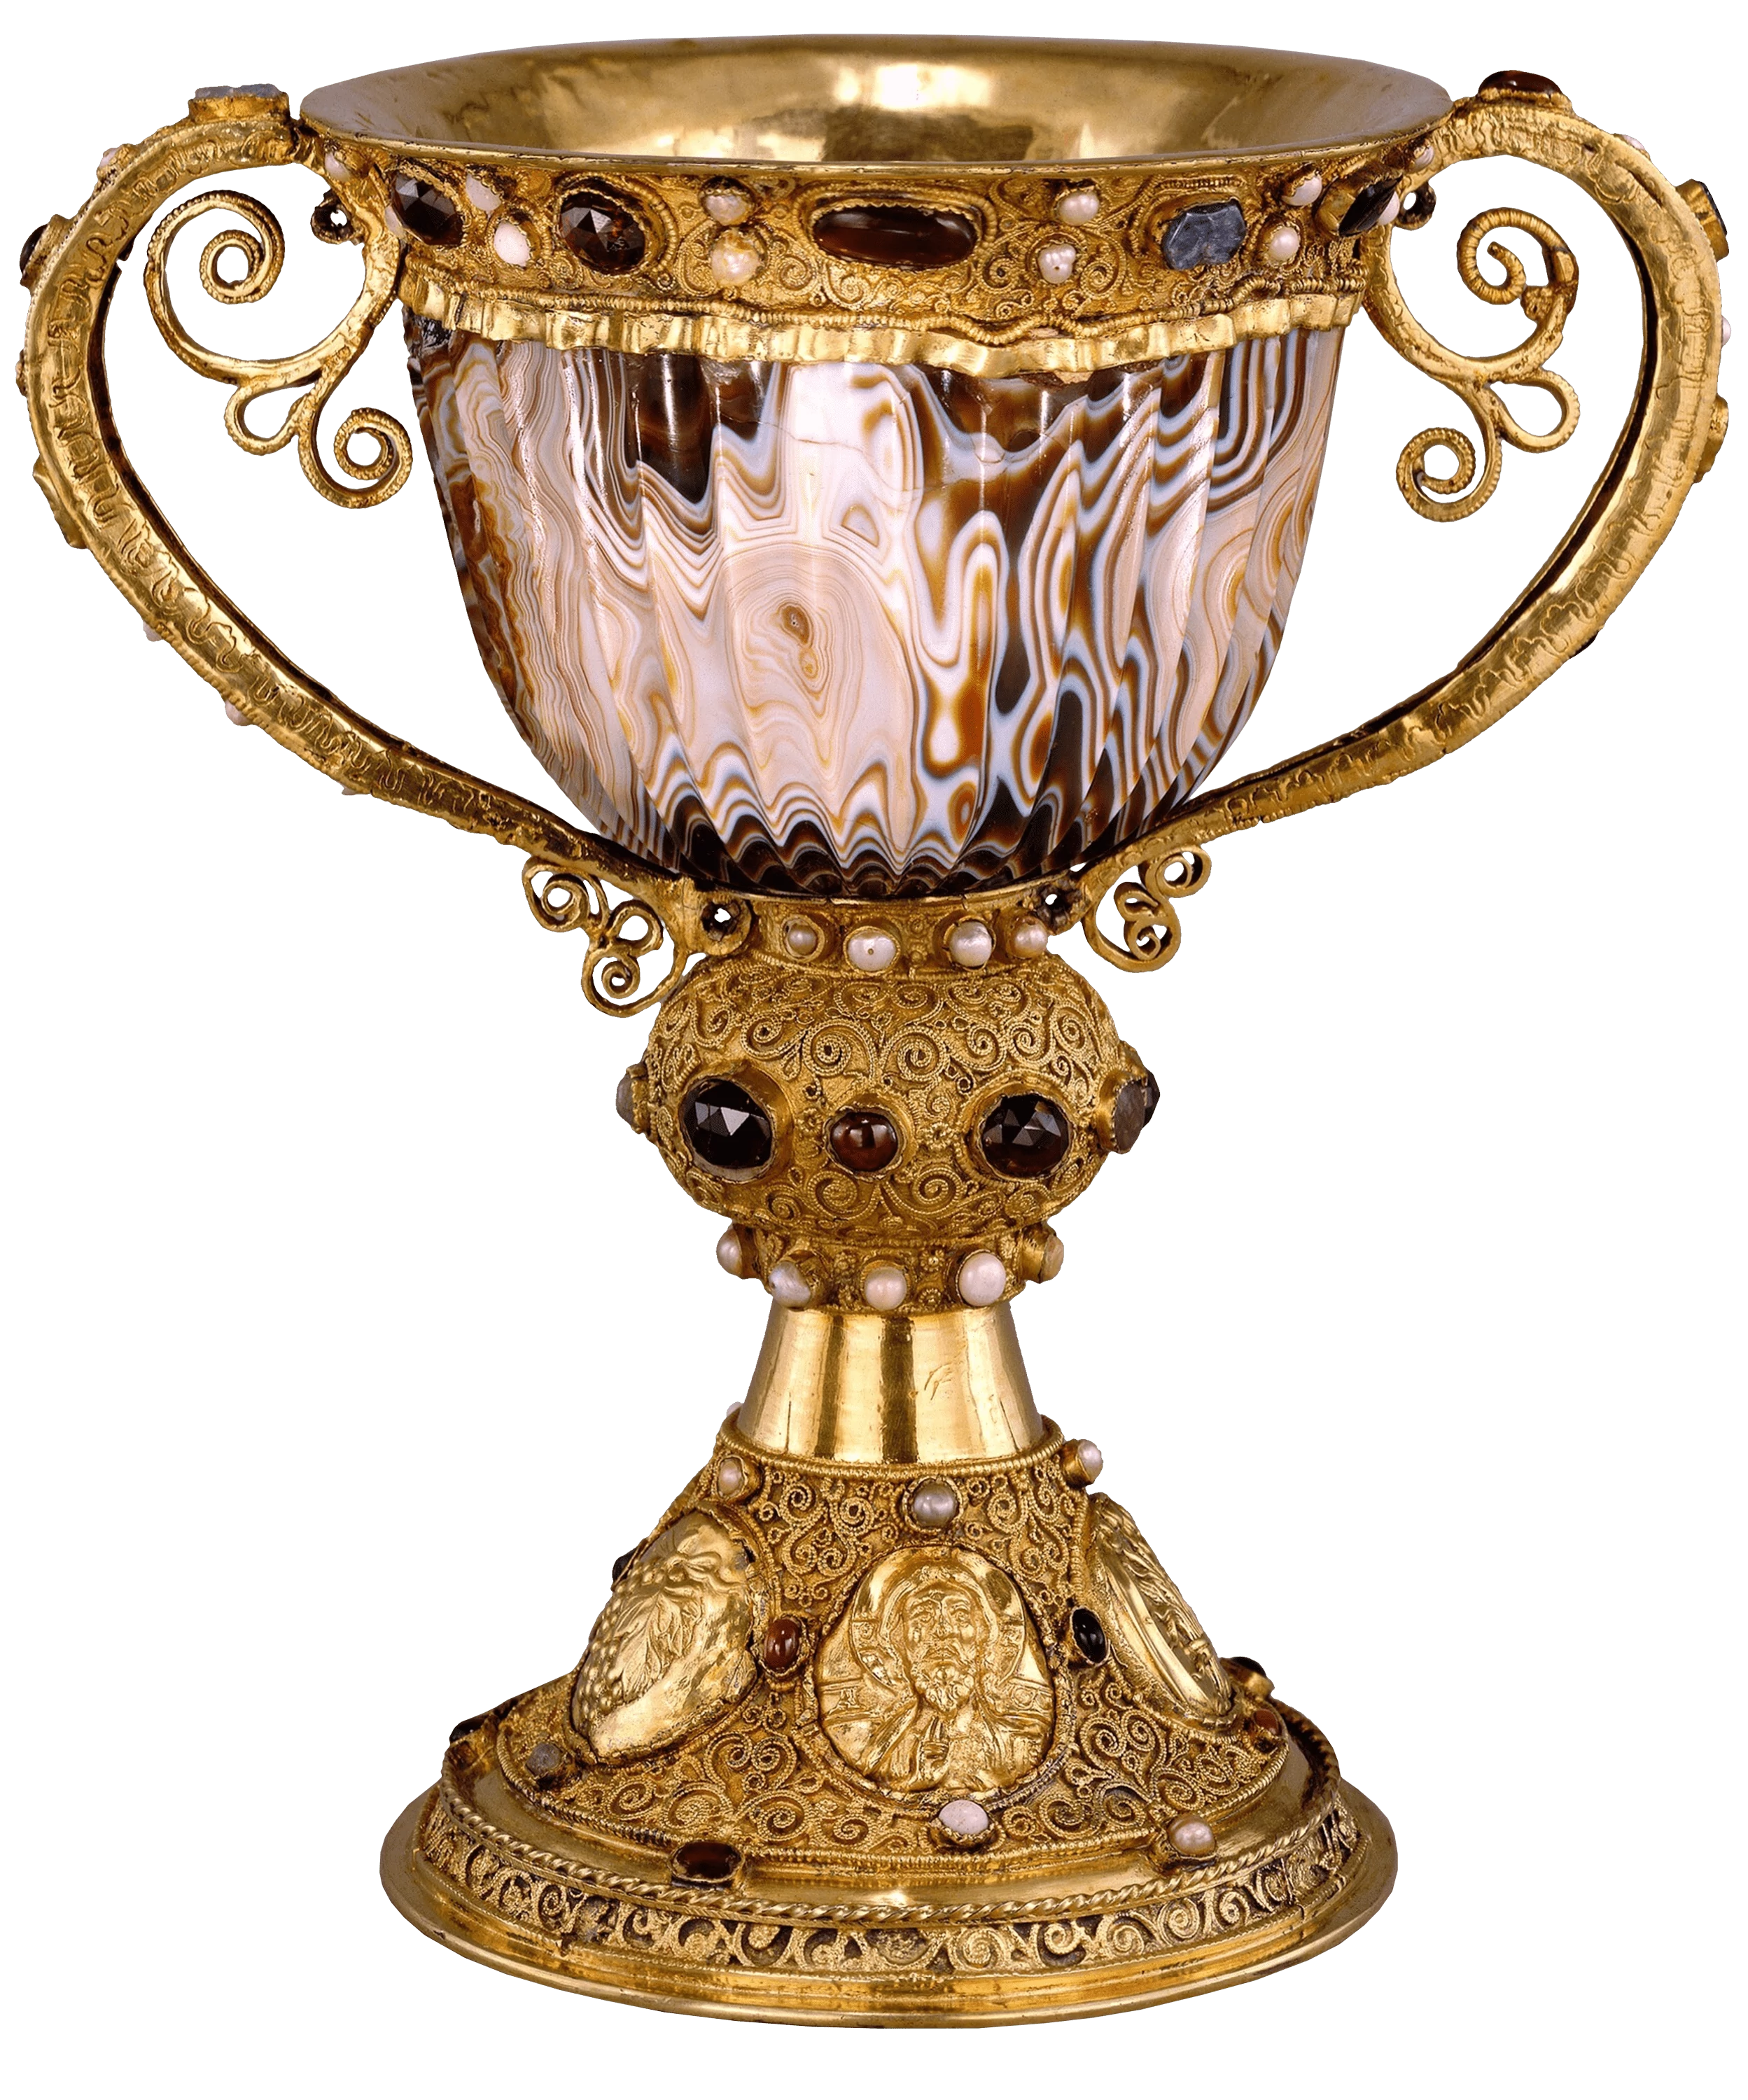 Chalice of the Abbot Suger of Saint-Denis, Gothic Art